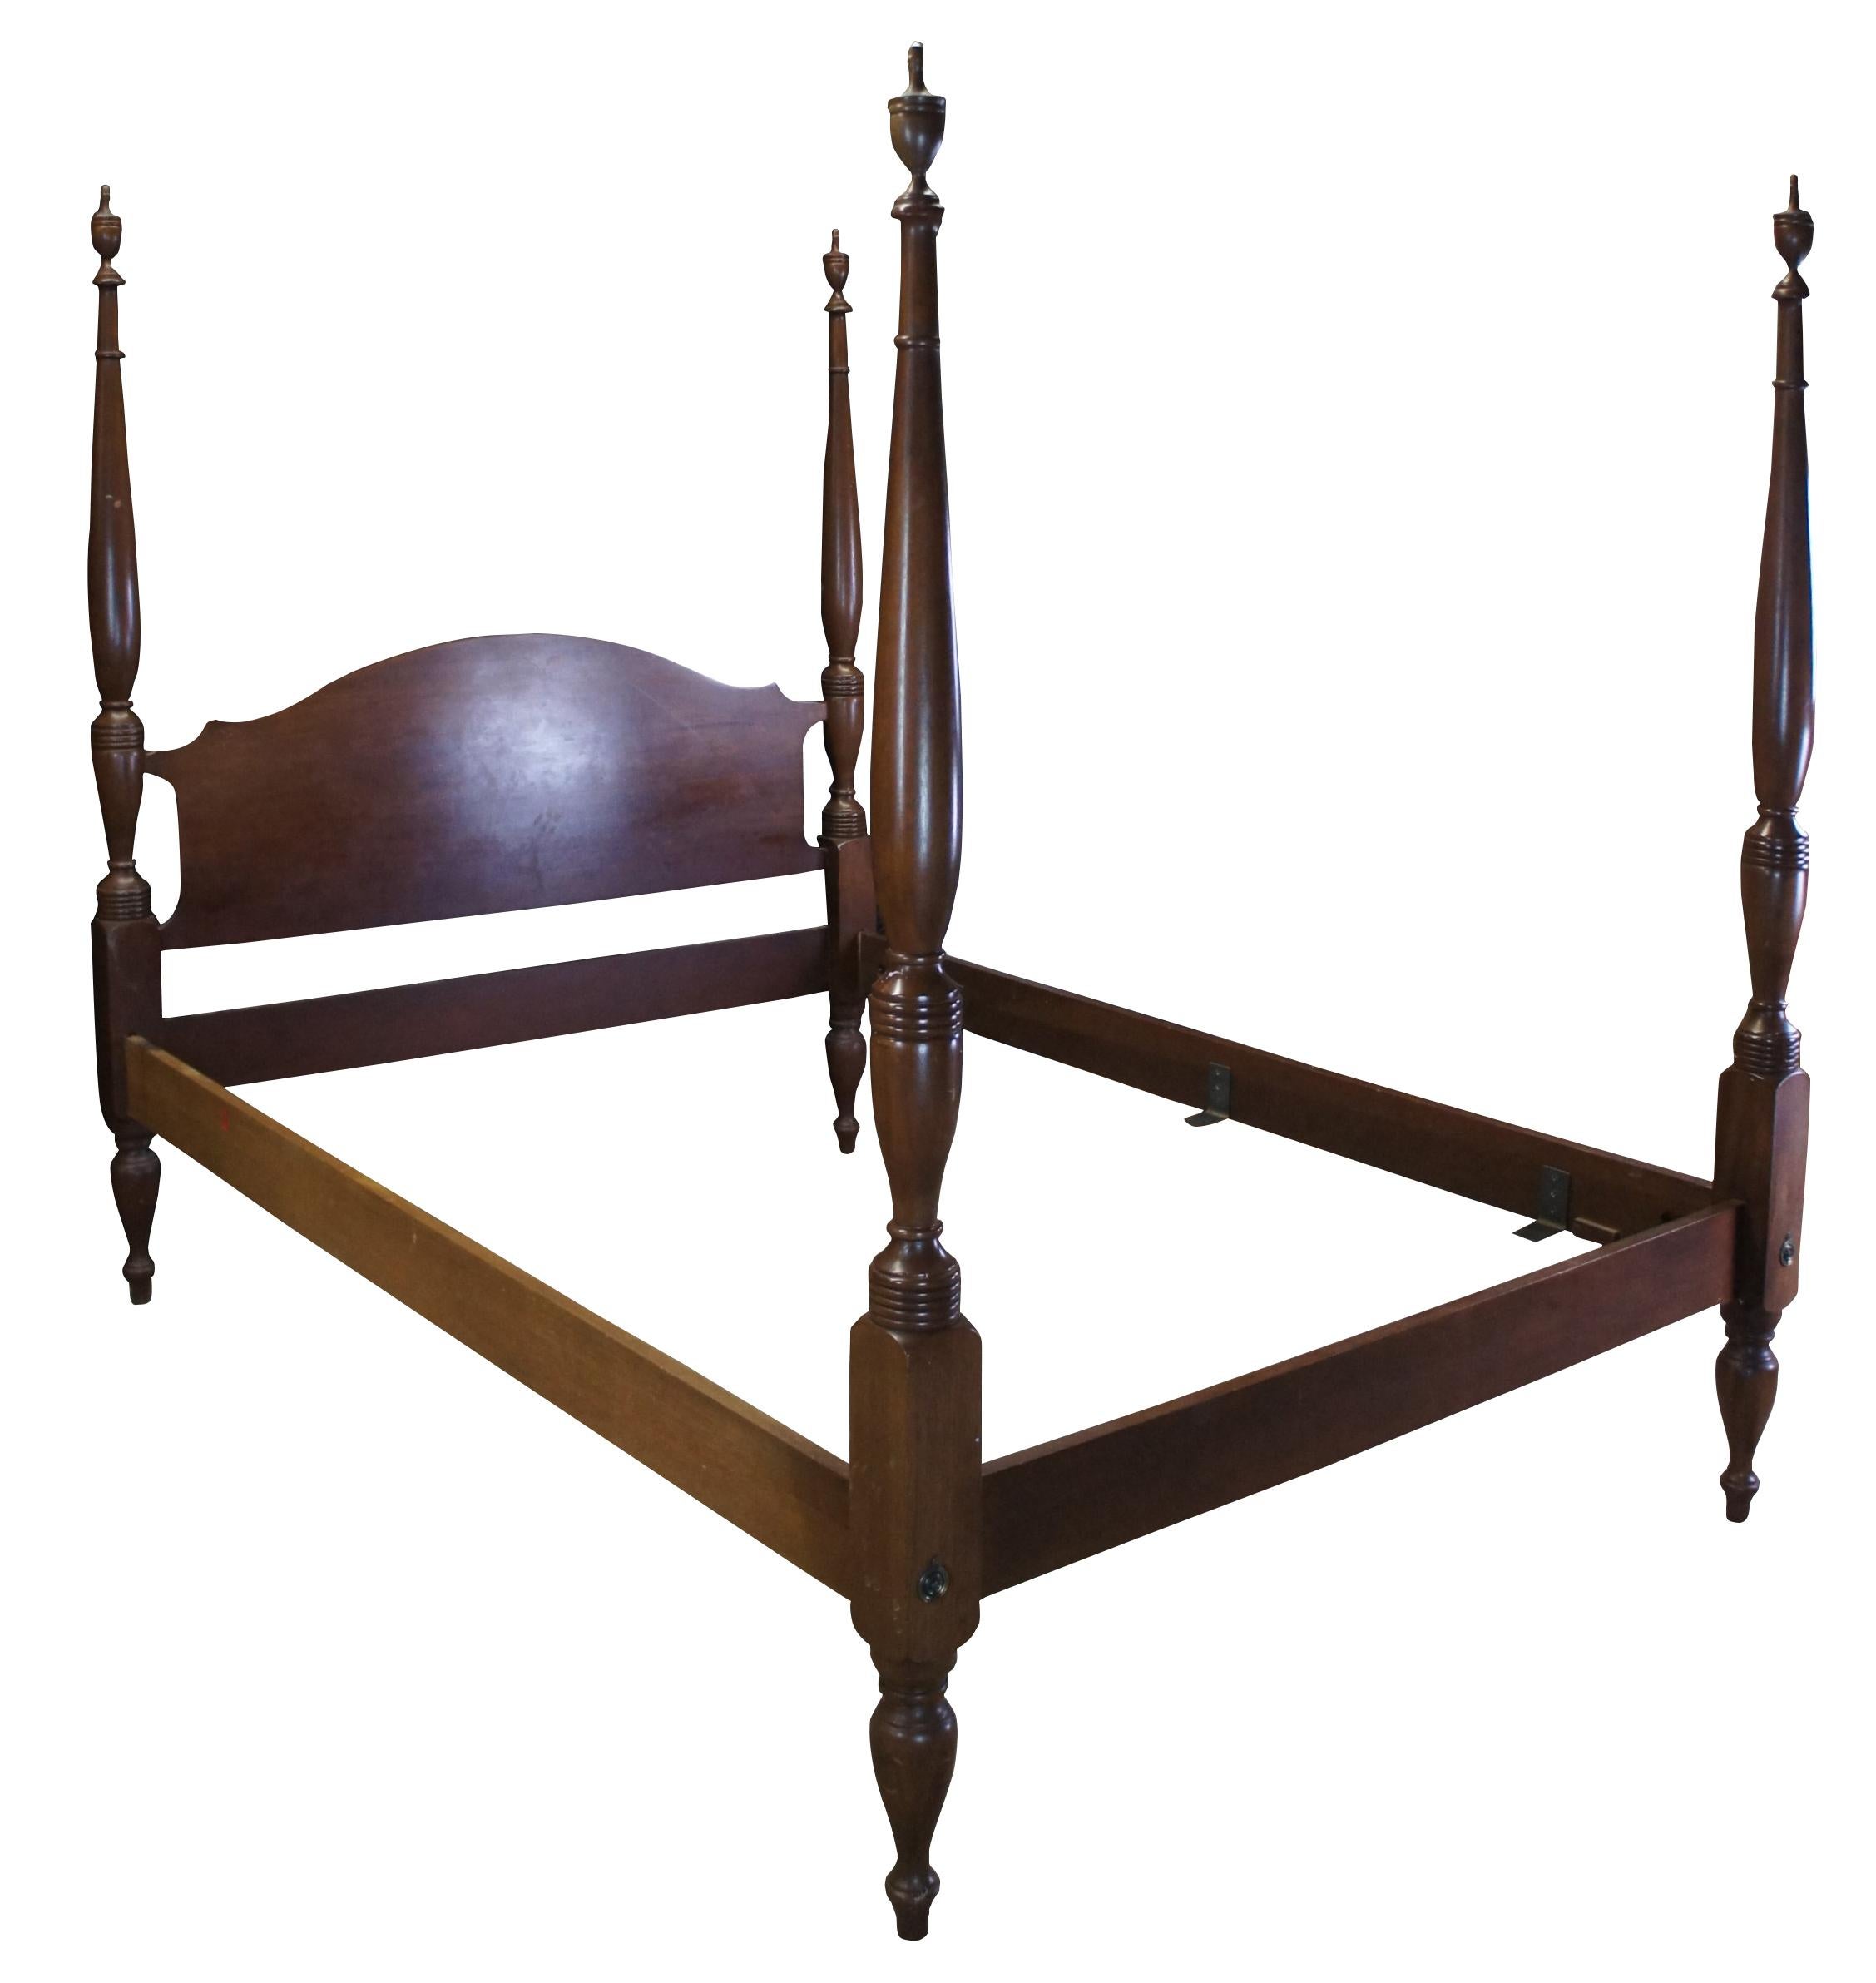 A beautiful 4 poster solid Mahogany Bed by Craftique. Craftique was founded in 1946 by L.P. Best, who sold the company to Pulaski Furniture in 1988. This bed features a camelback headboard and long turned ribbed posts with carved accents leading to